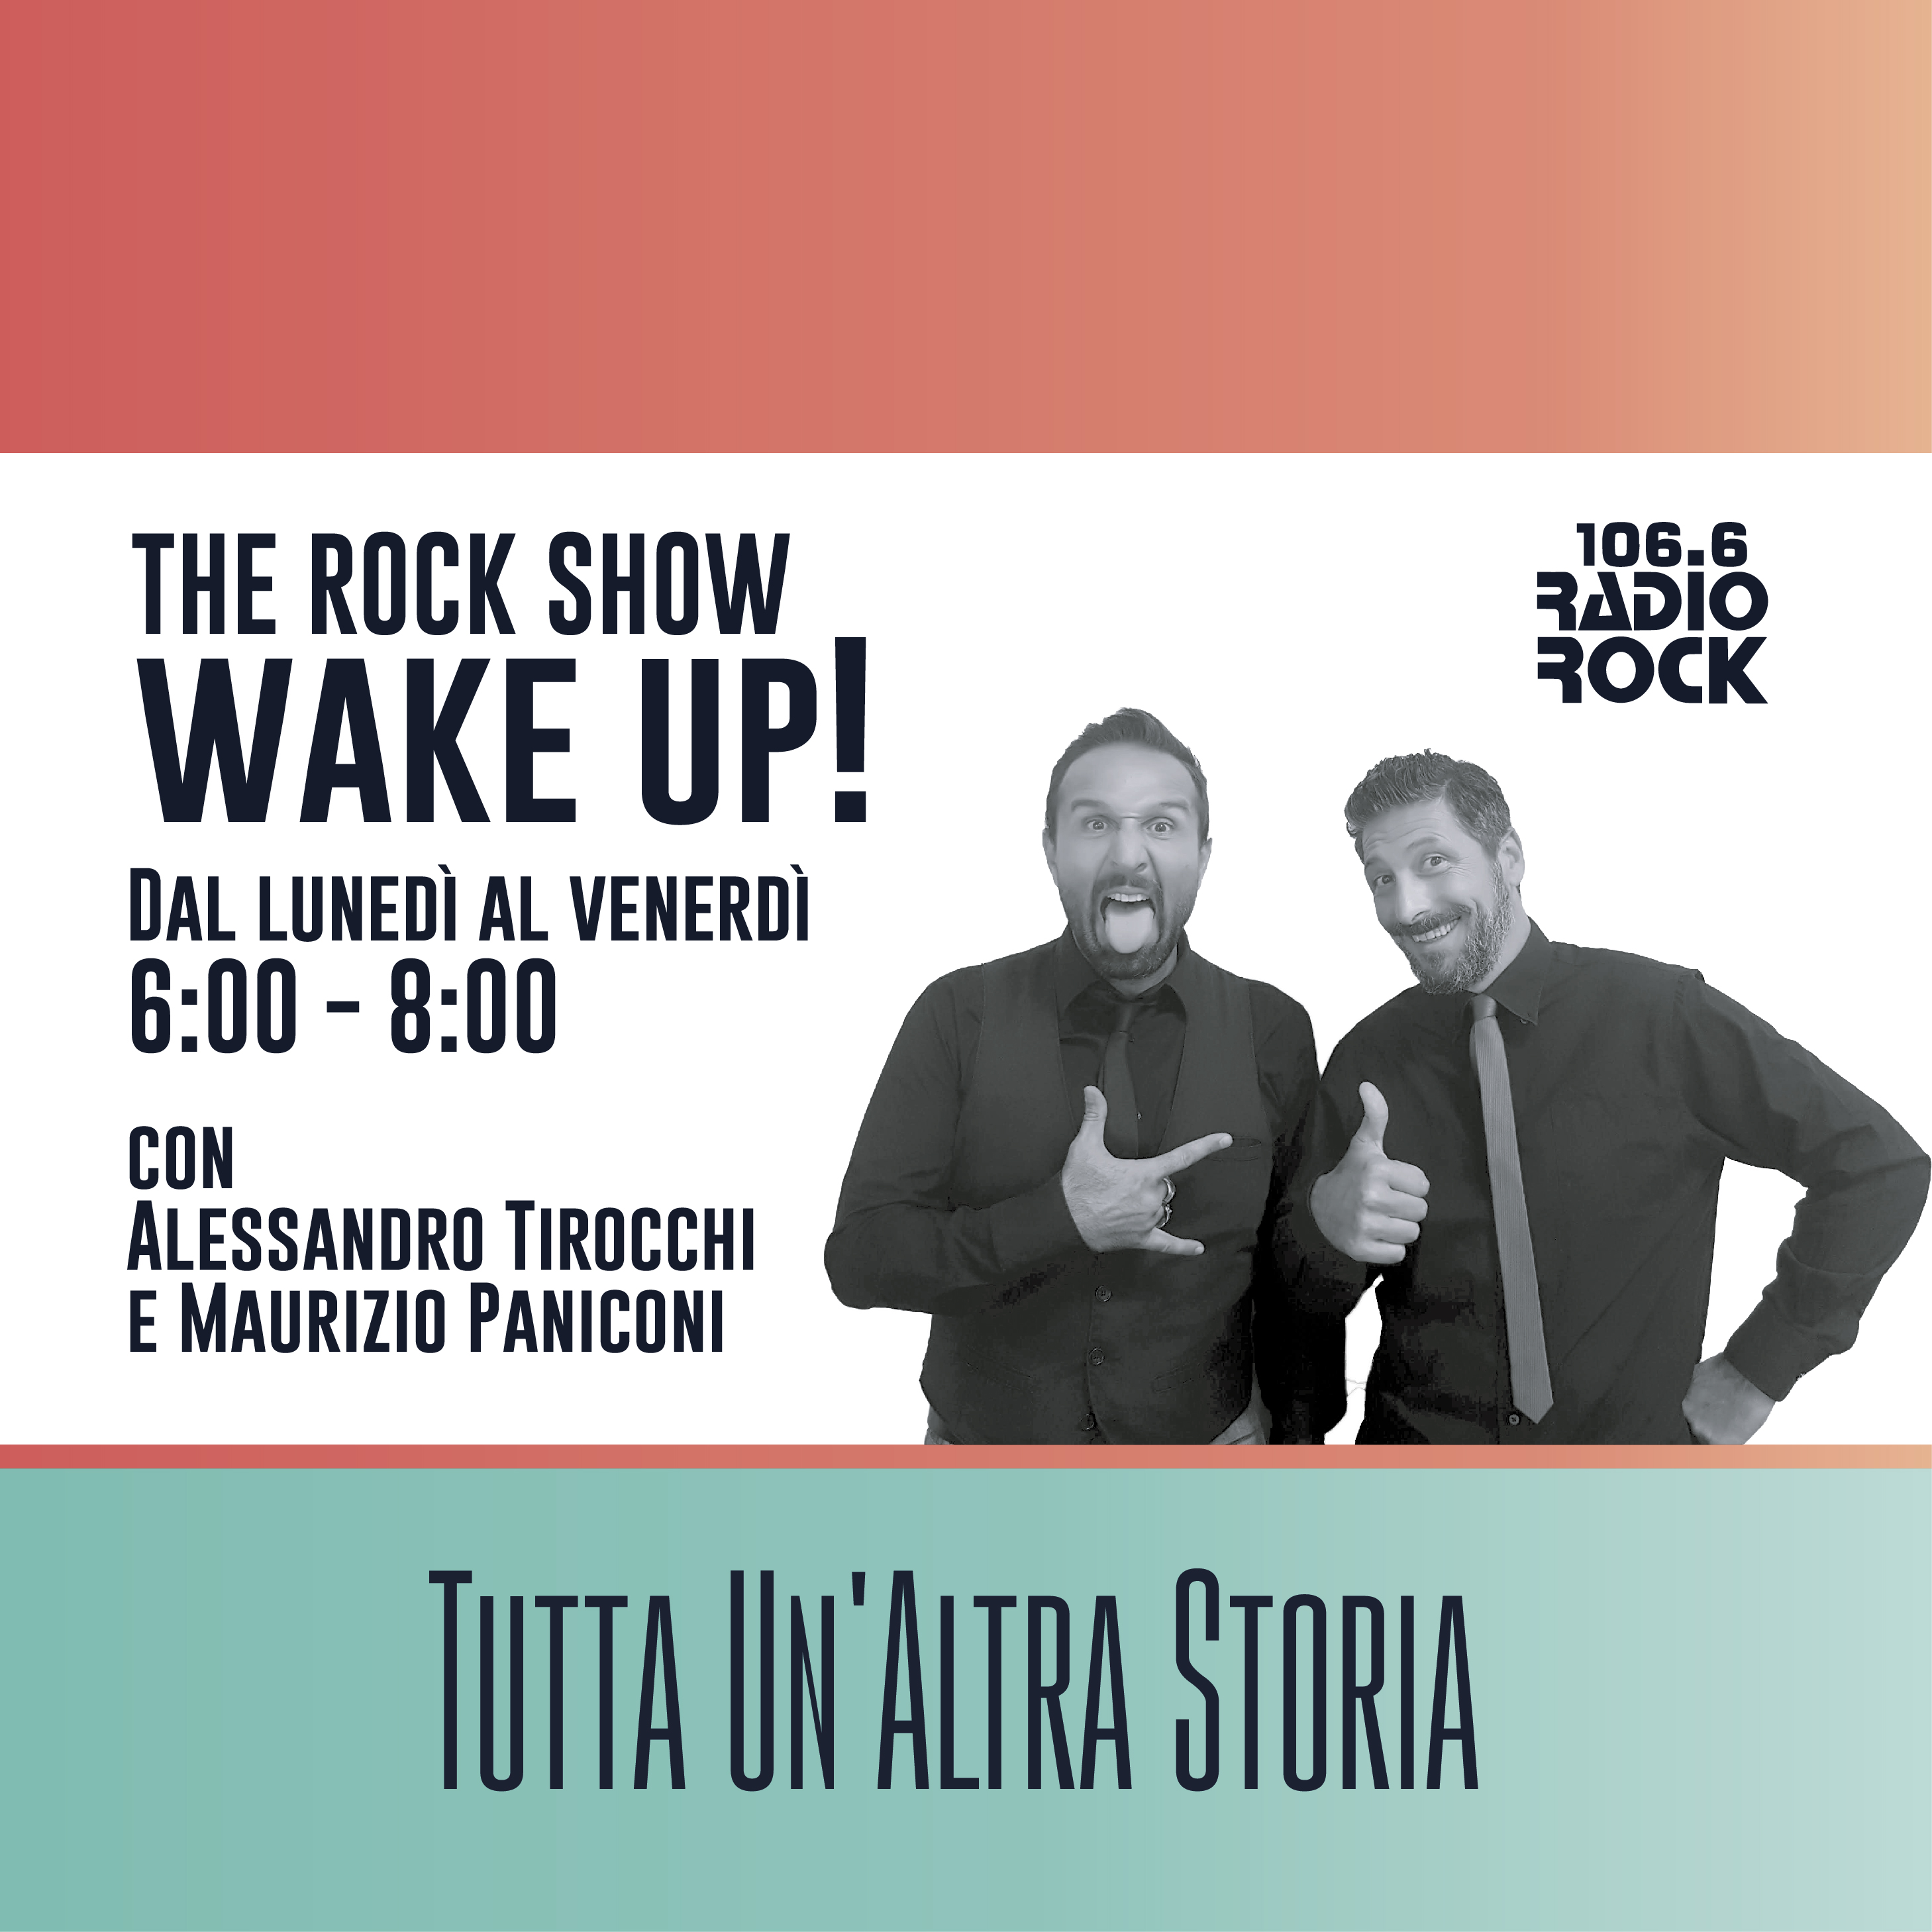 The Rock Show: Wake Up! (22-02-21)